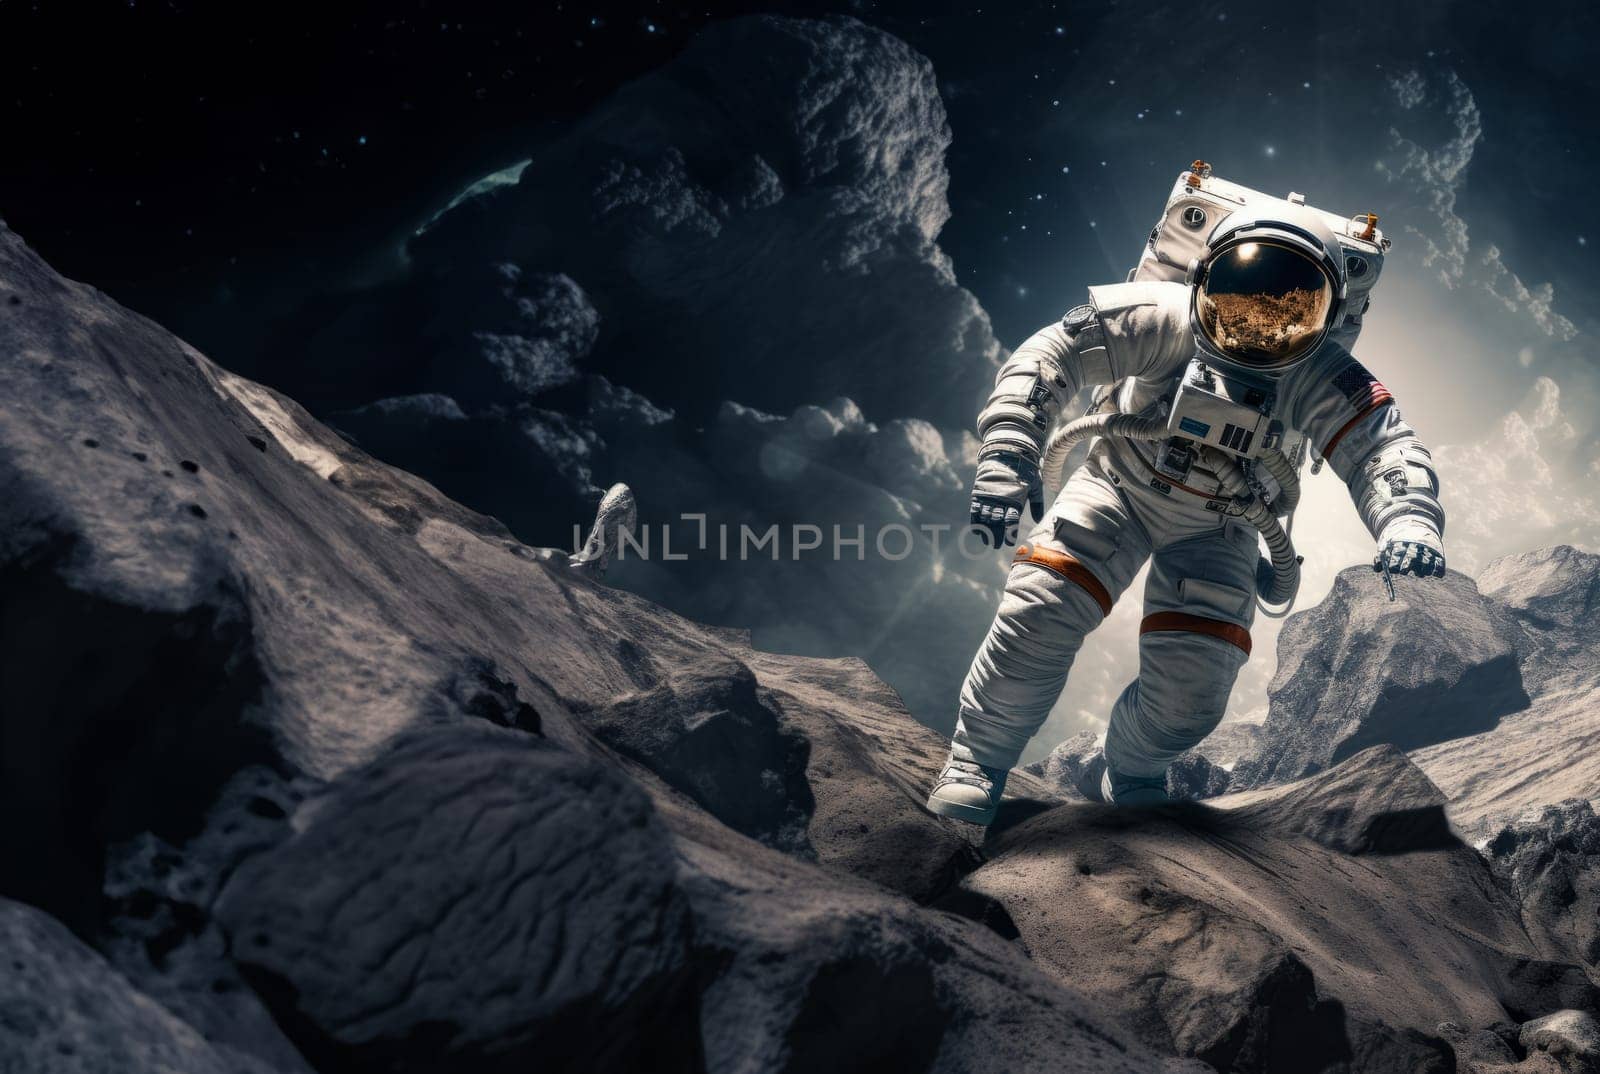 A modern astronaut is depicted exploring the surface of the moon, embodying the spirit of adventure and scientific exploration in the vastness of outer space.Generated image by dotshock